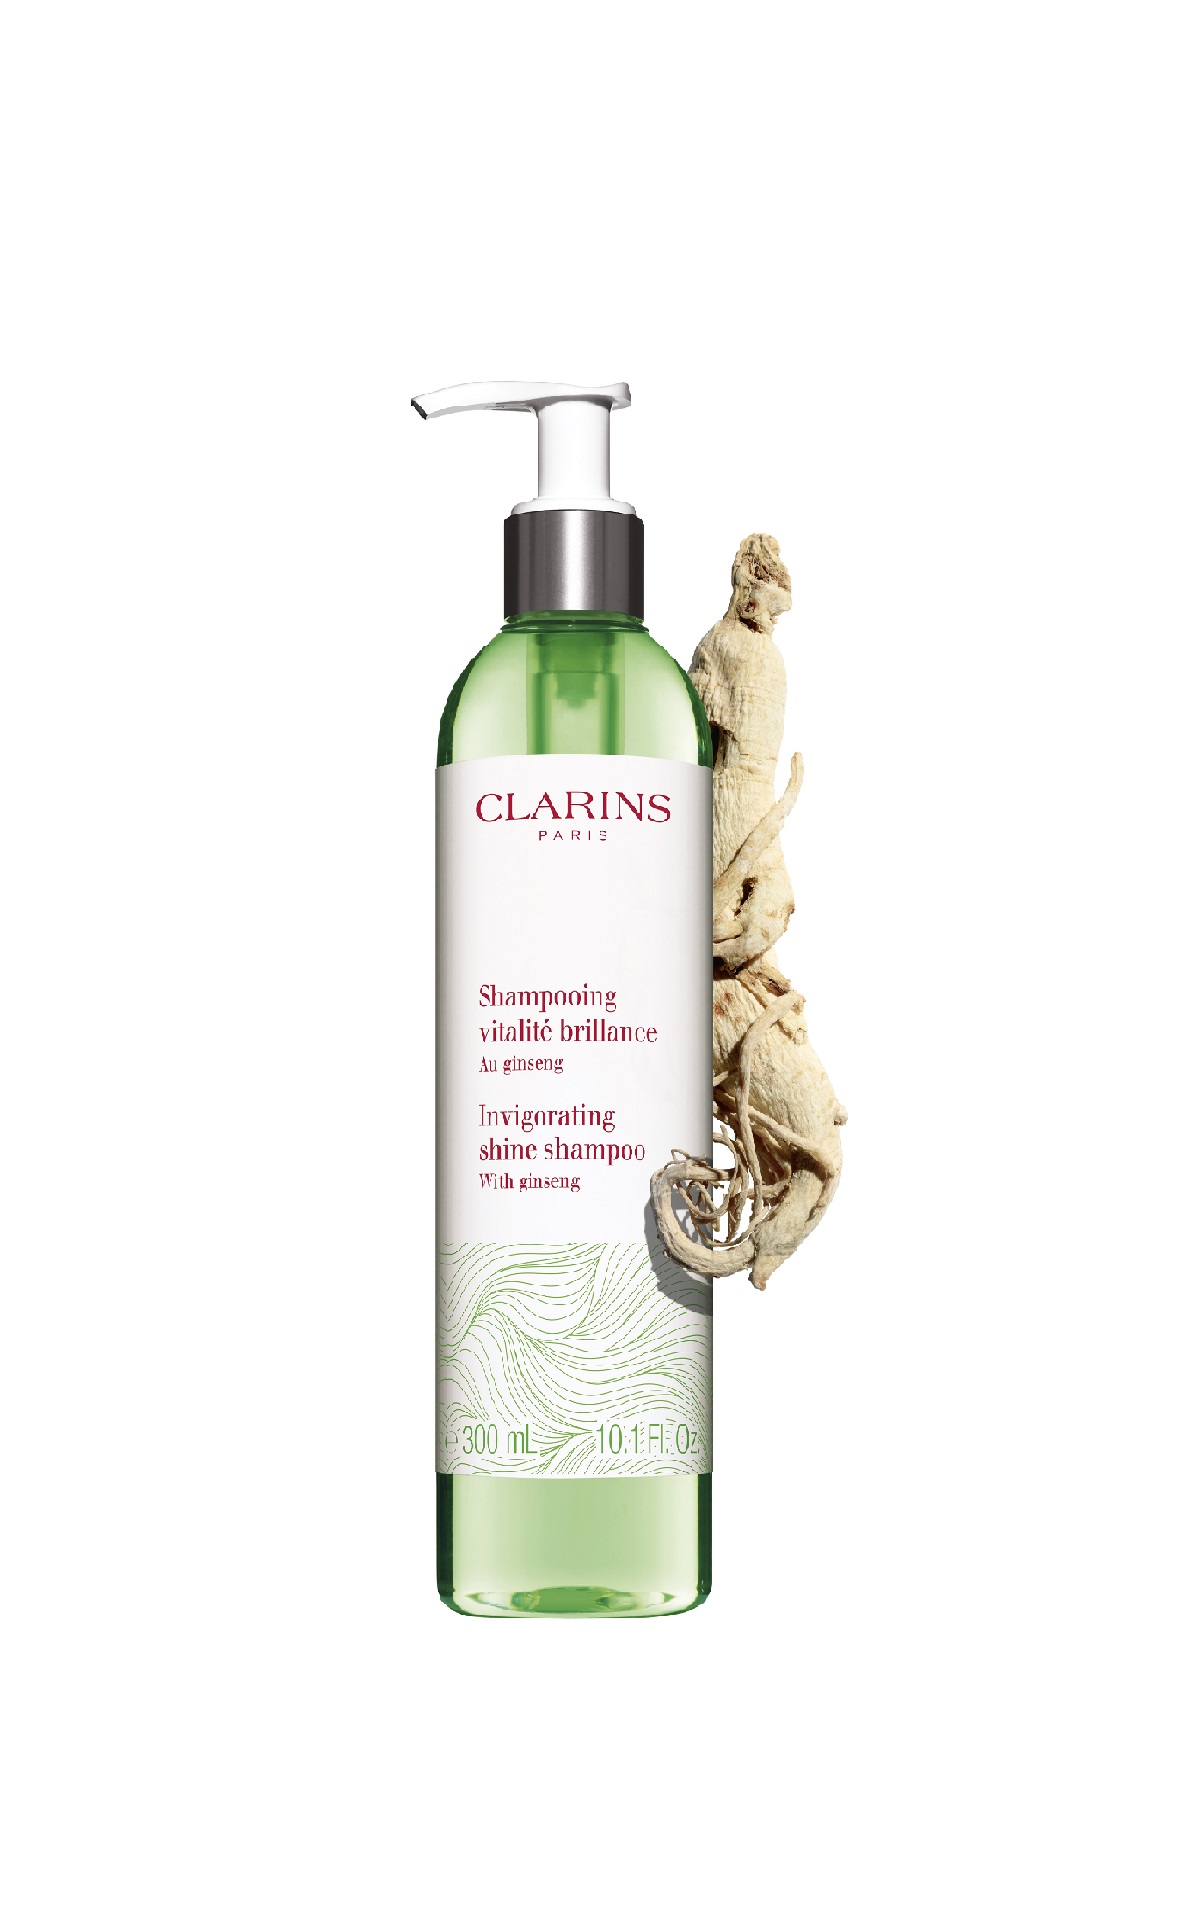 Shampoo with panax ginseng clarins